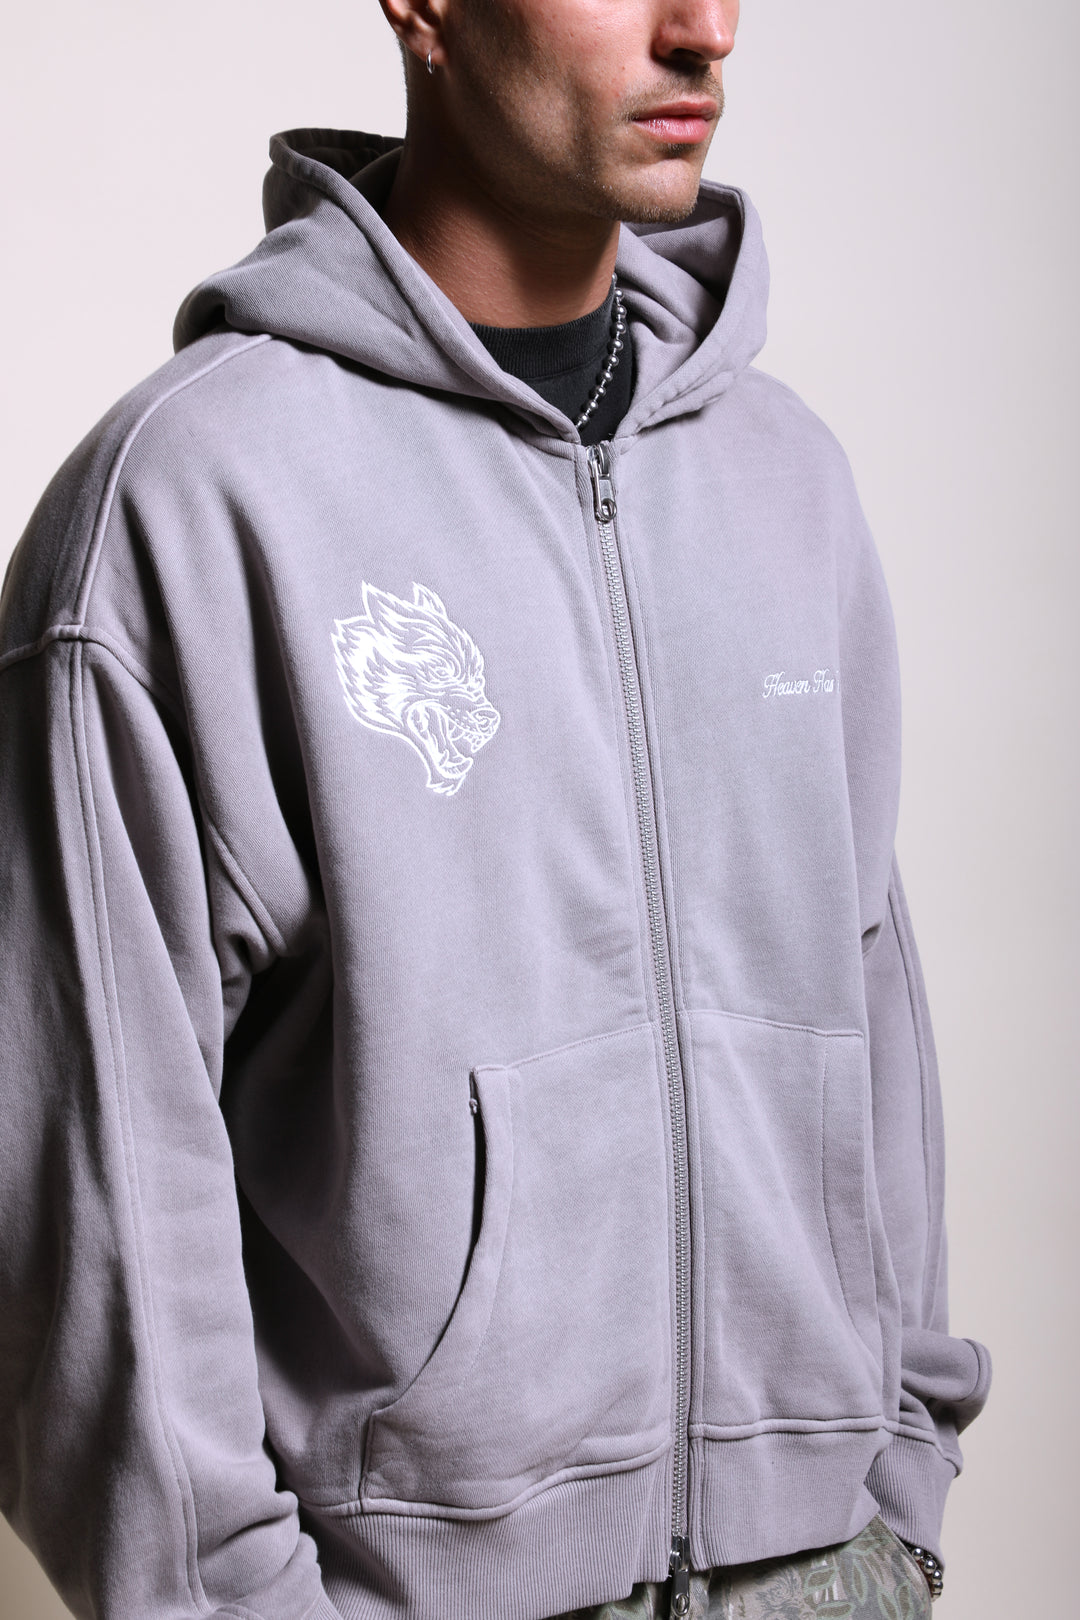 Time Darco Double Zip Hoodie in Pale Gray